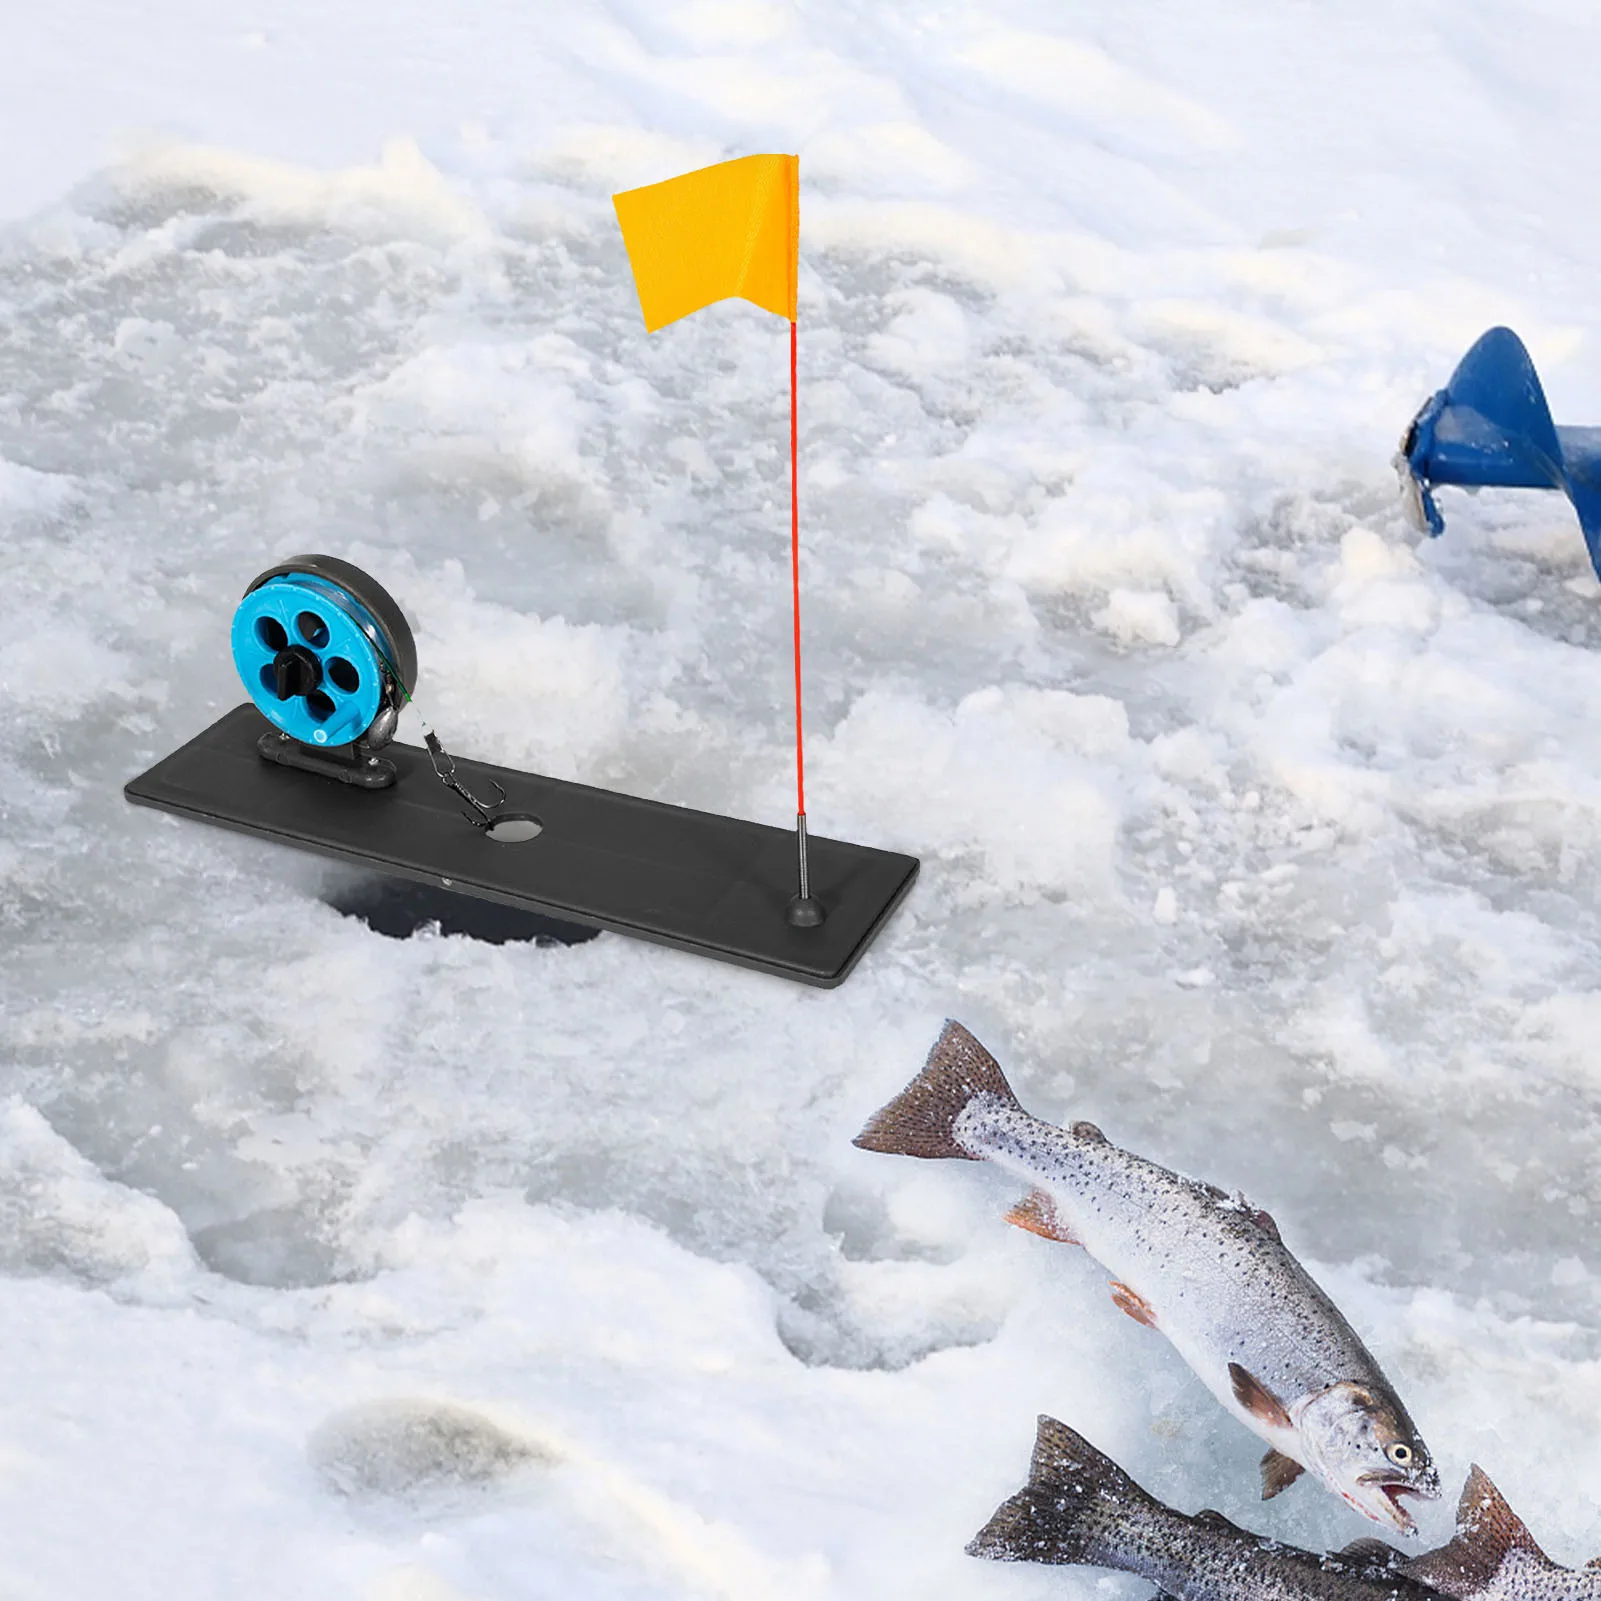 https://ae01.alicdn.com/kf/S9a0d9af2eeb7437a86f305e0cdfa2f5cw/Newest-Ice-Fishing-Tip-up-Portable-Winter-Ice-Fishing-Rod-Tip-Up-With-Flag-Pole-Indicator.jpg